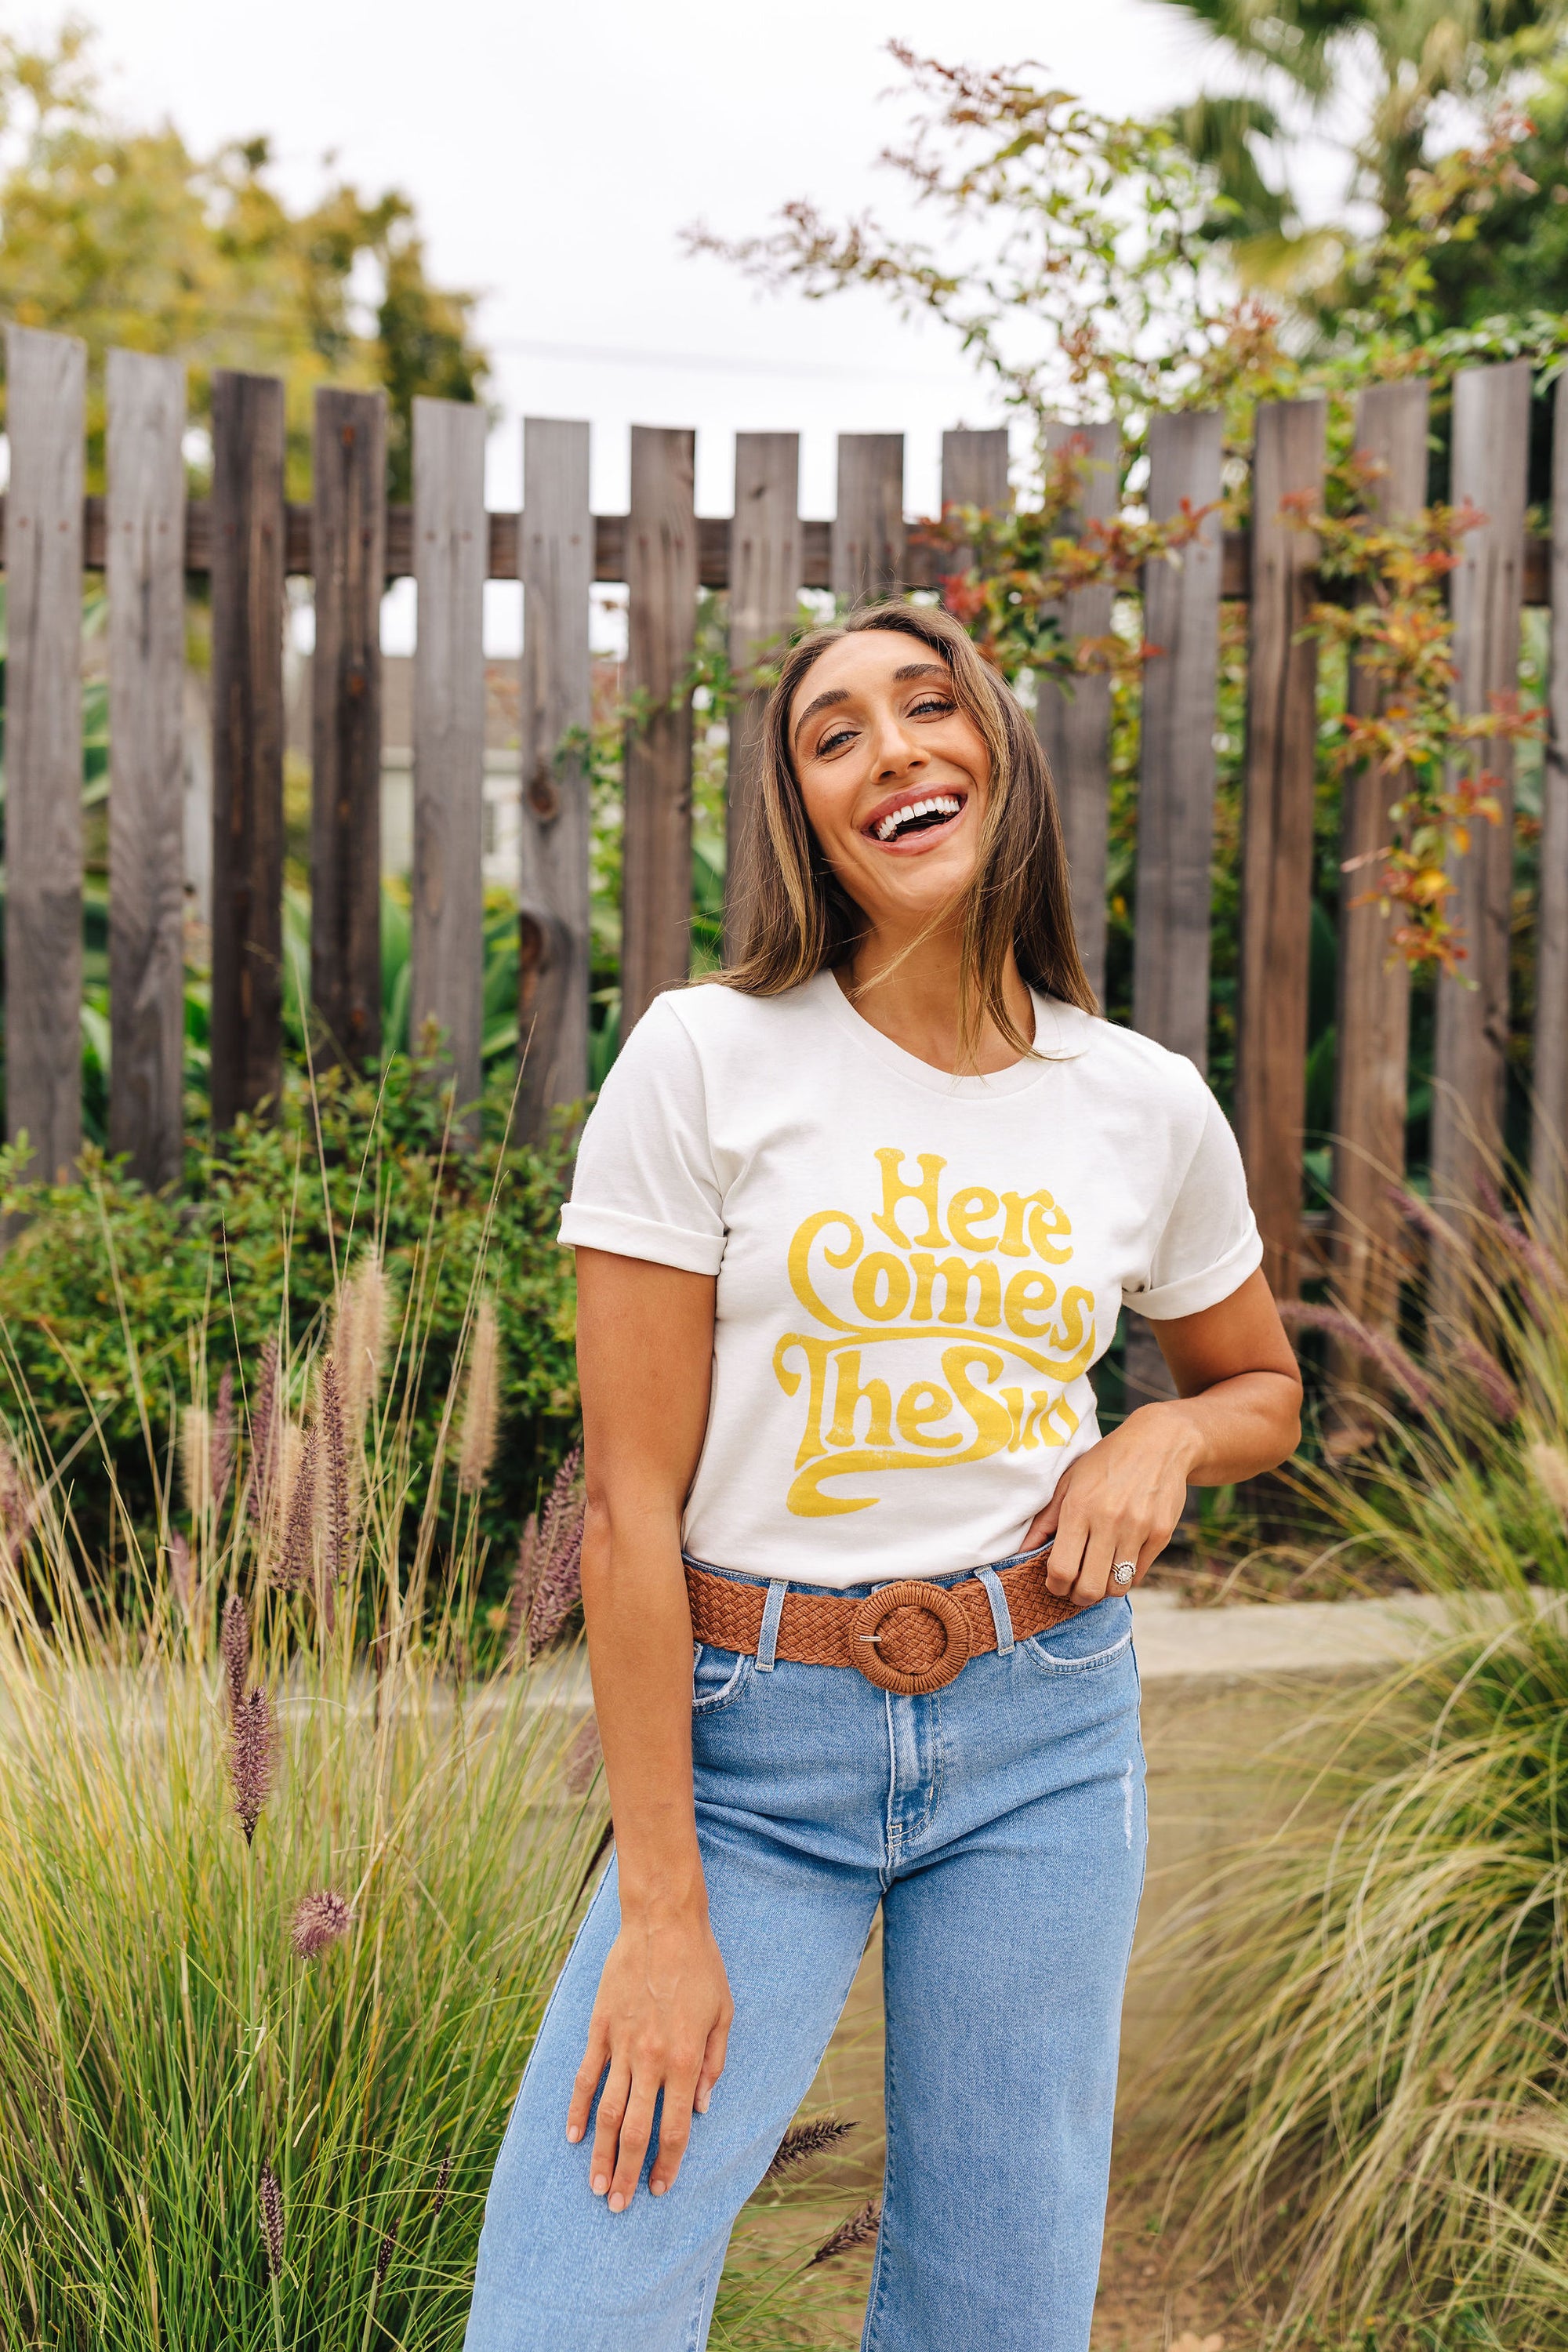 The Here Comes The Sun Graphic Tee